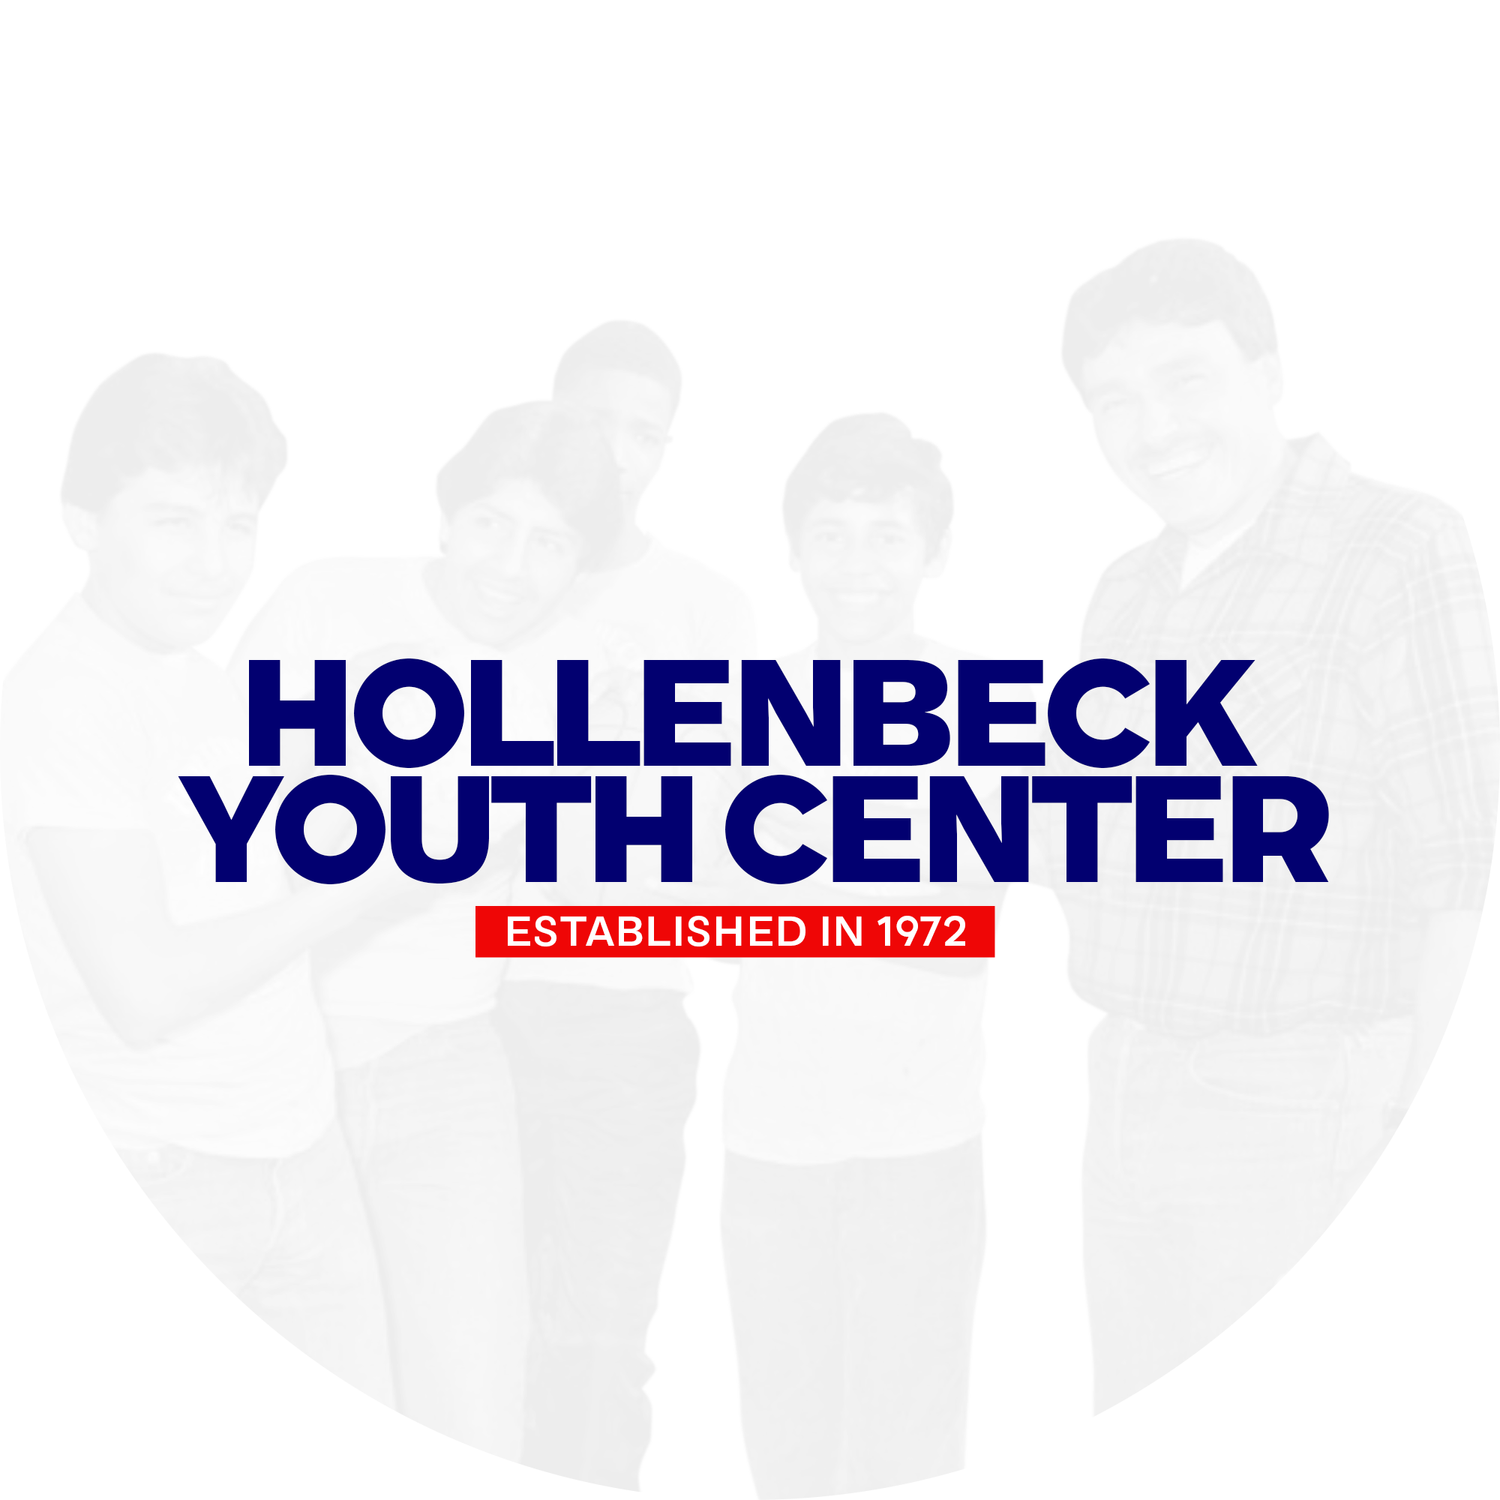 Hollenbeck Youth Center: Career Series Resource